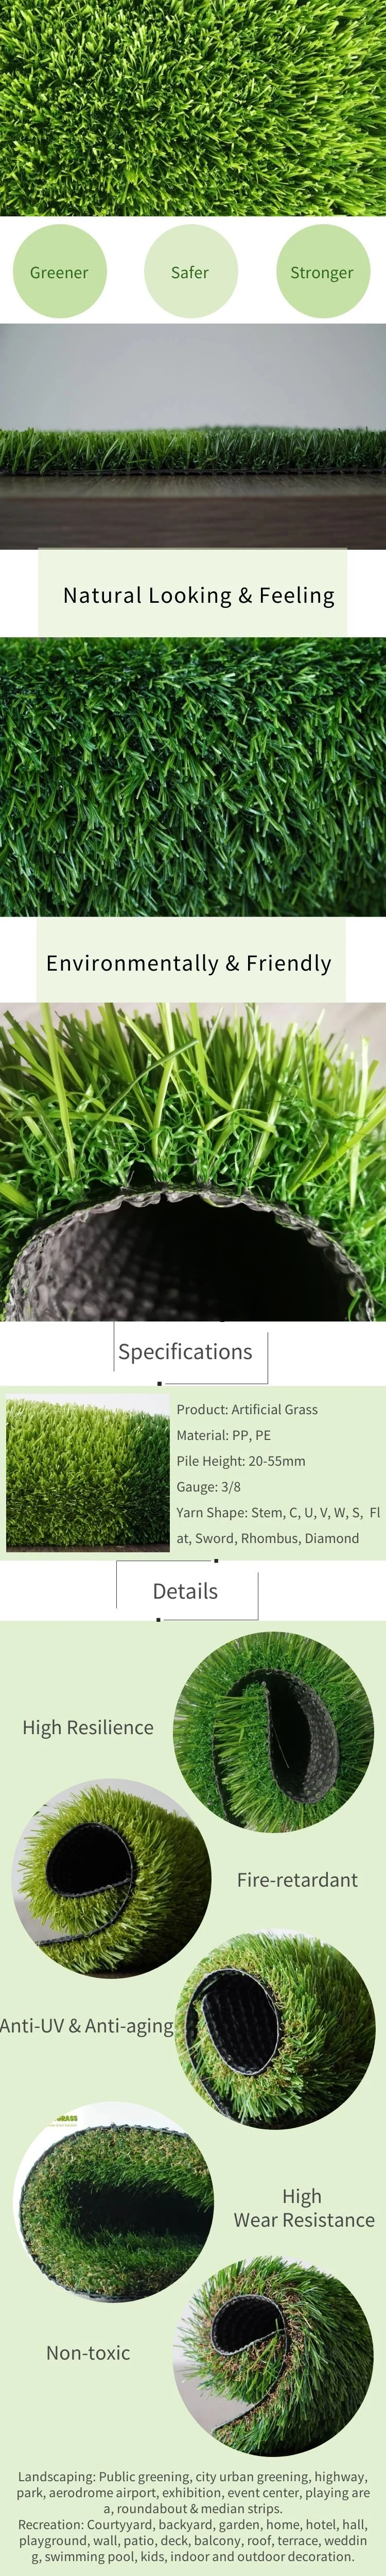 Artificial Turf/Artificial Grass for Landscaping and Leisure Area Decoration Lawn